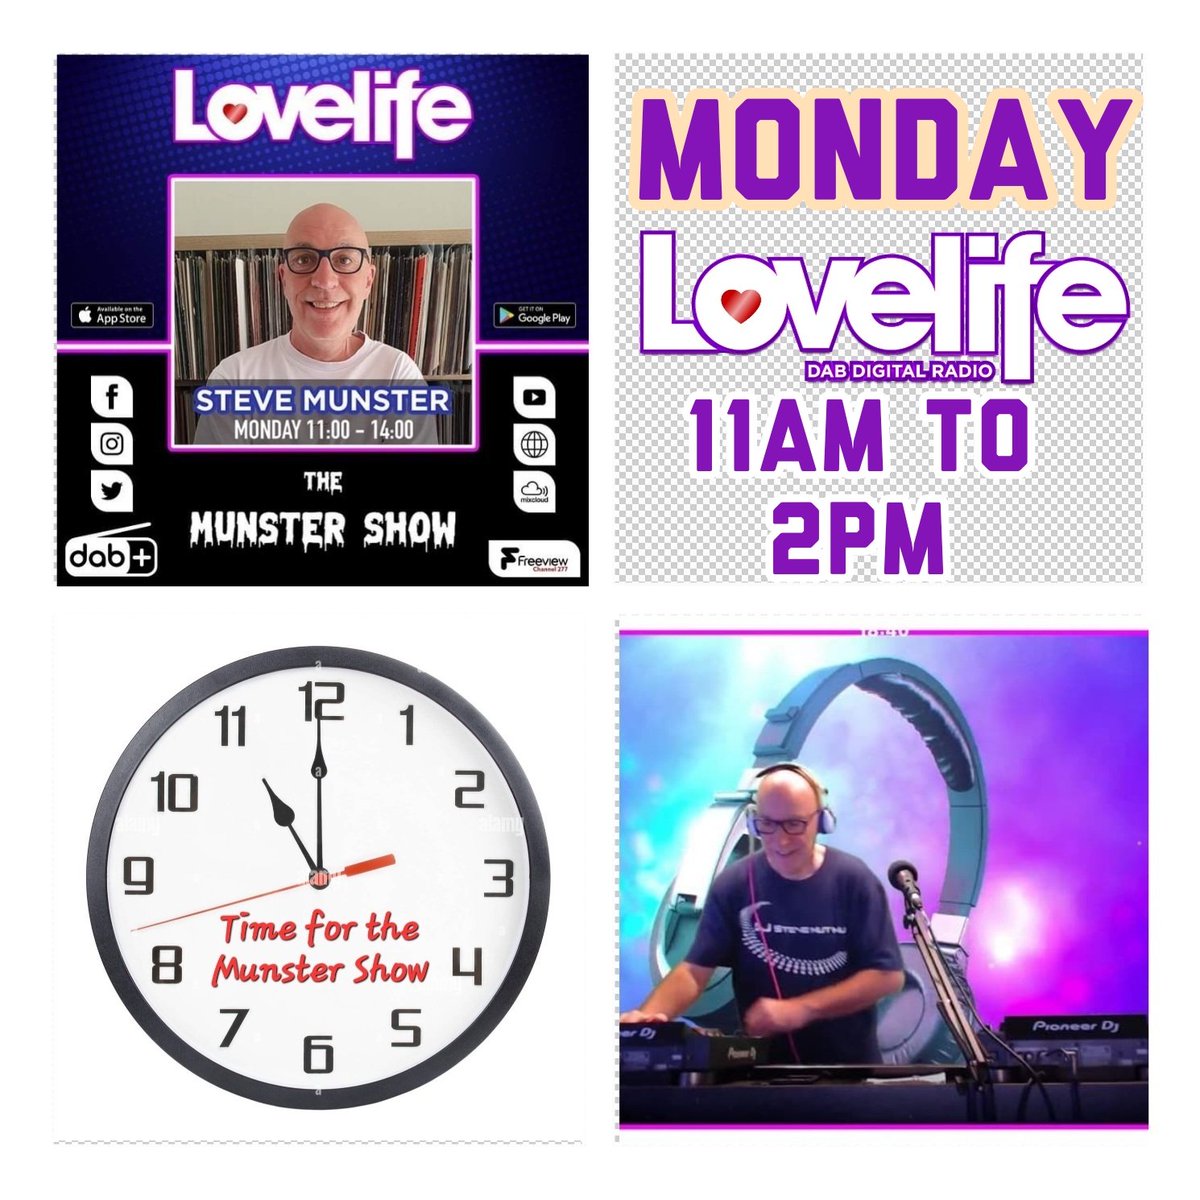 I am back in the office on Monday & Tuesday to do my Radio show on @LoveLife_Radio DAB from 11am to 2pm #travelling through the #decades with #music from the #1980s to Present #soul #disco #80s #90s #clubclassics #remixes #House #dance #Monday #Tuesday #nutnut #Munster #lovelife